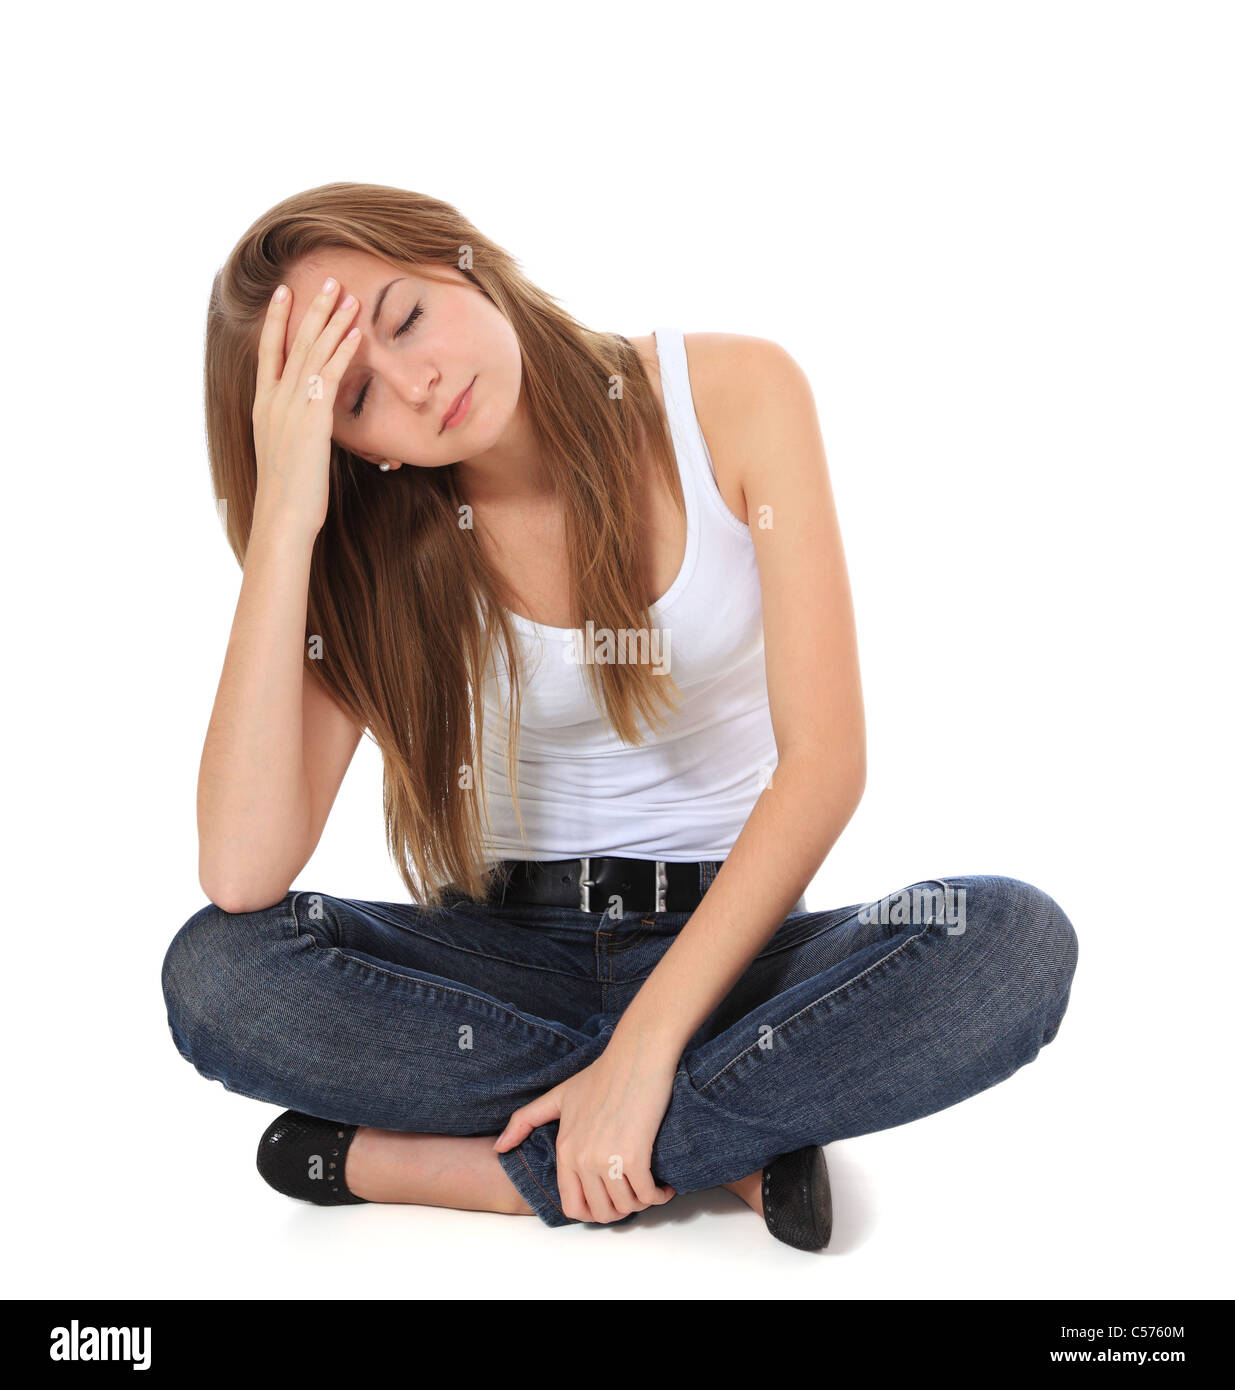 Full length shot of a frustrated young woman. All on white background. Stock Photo